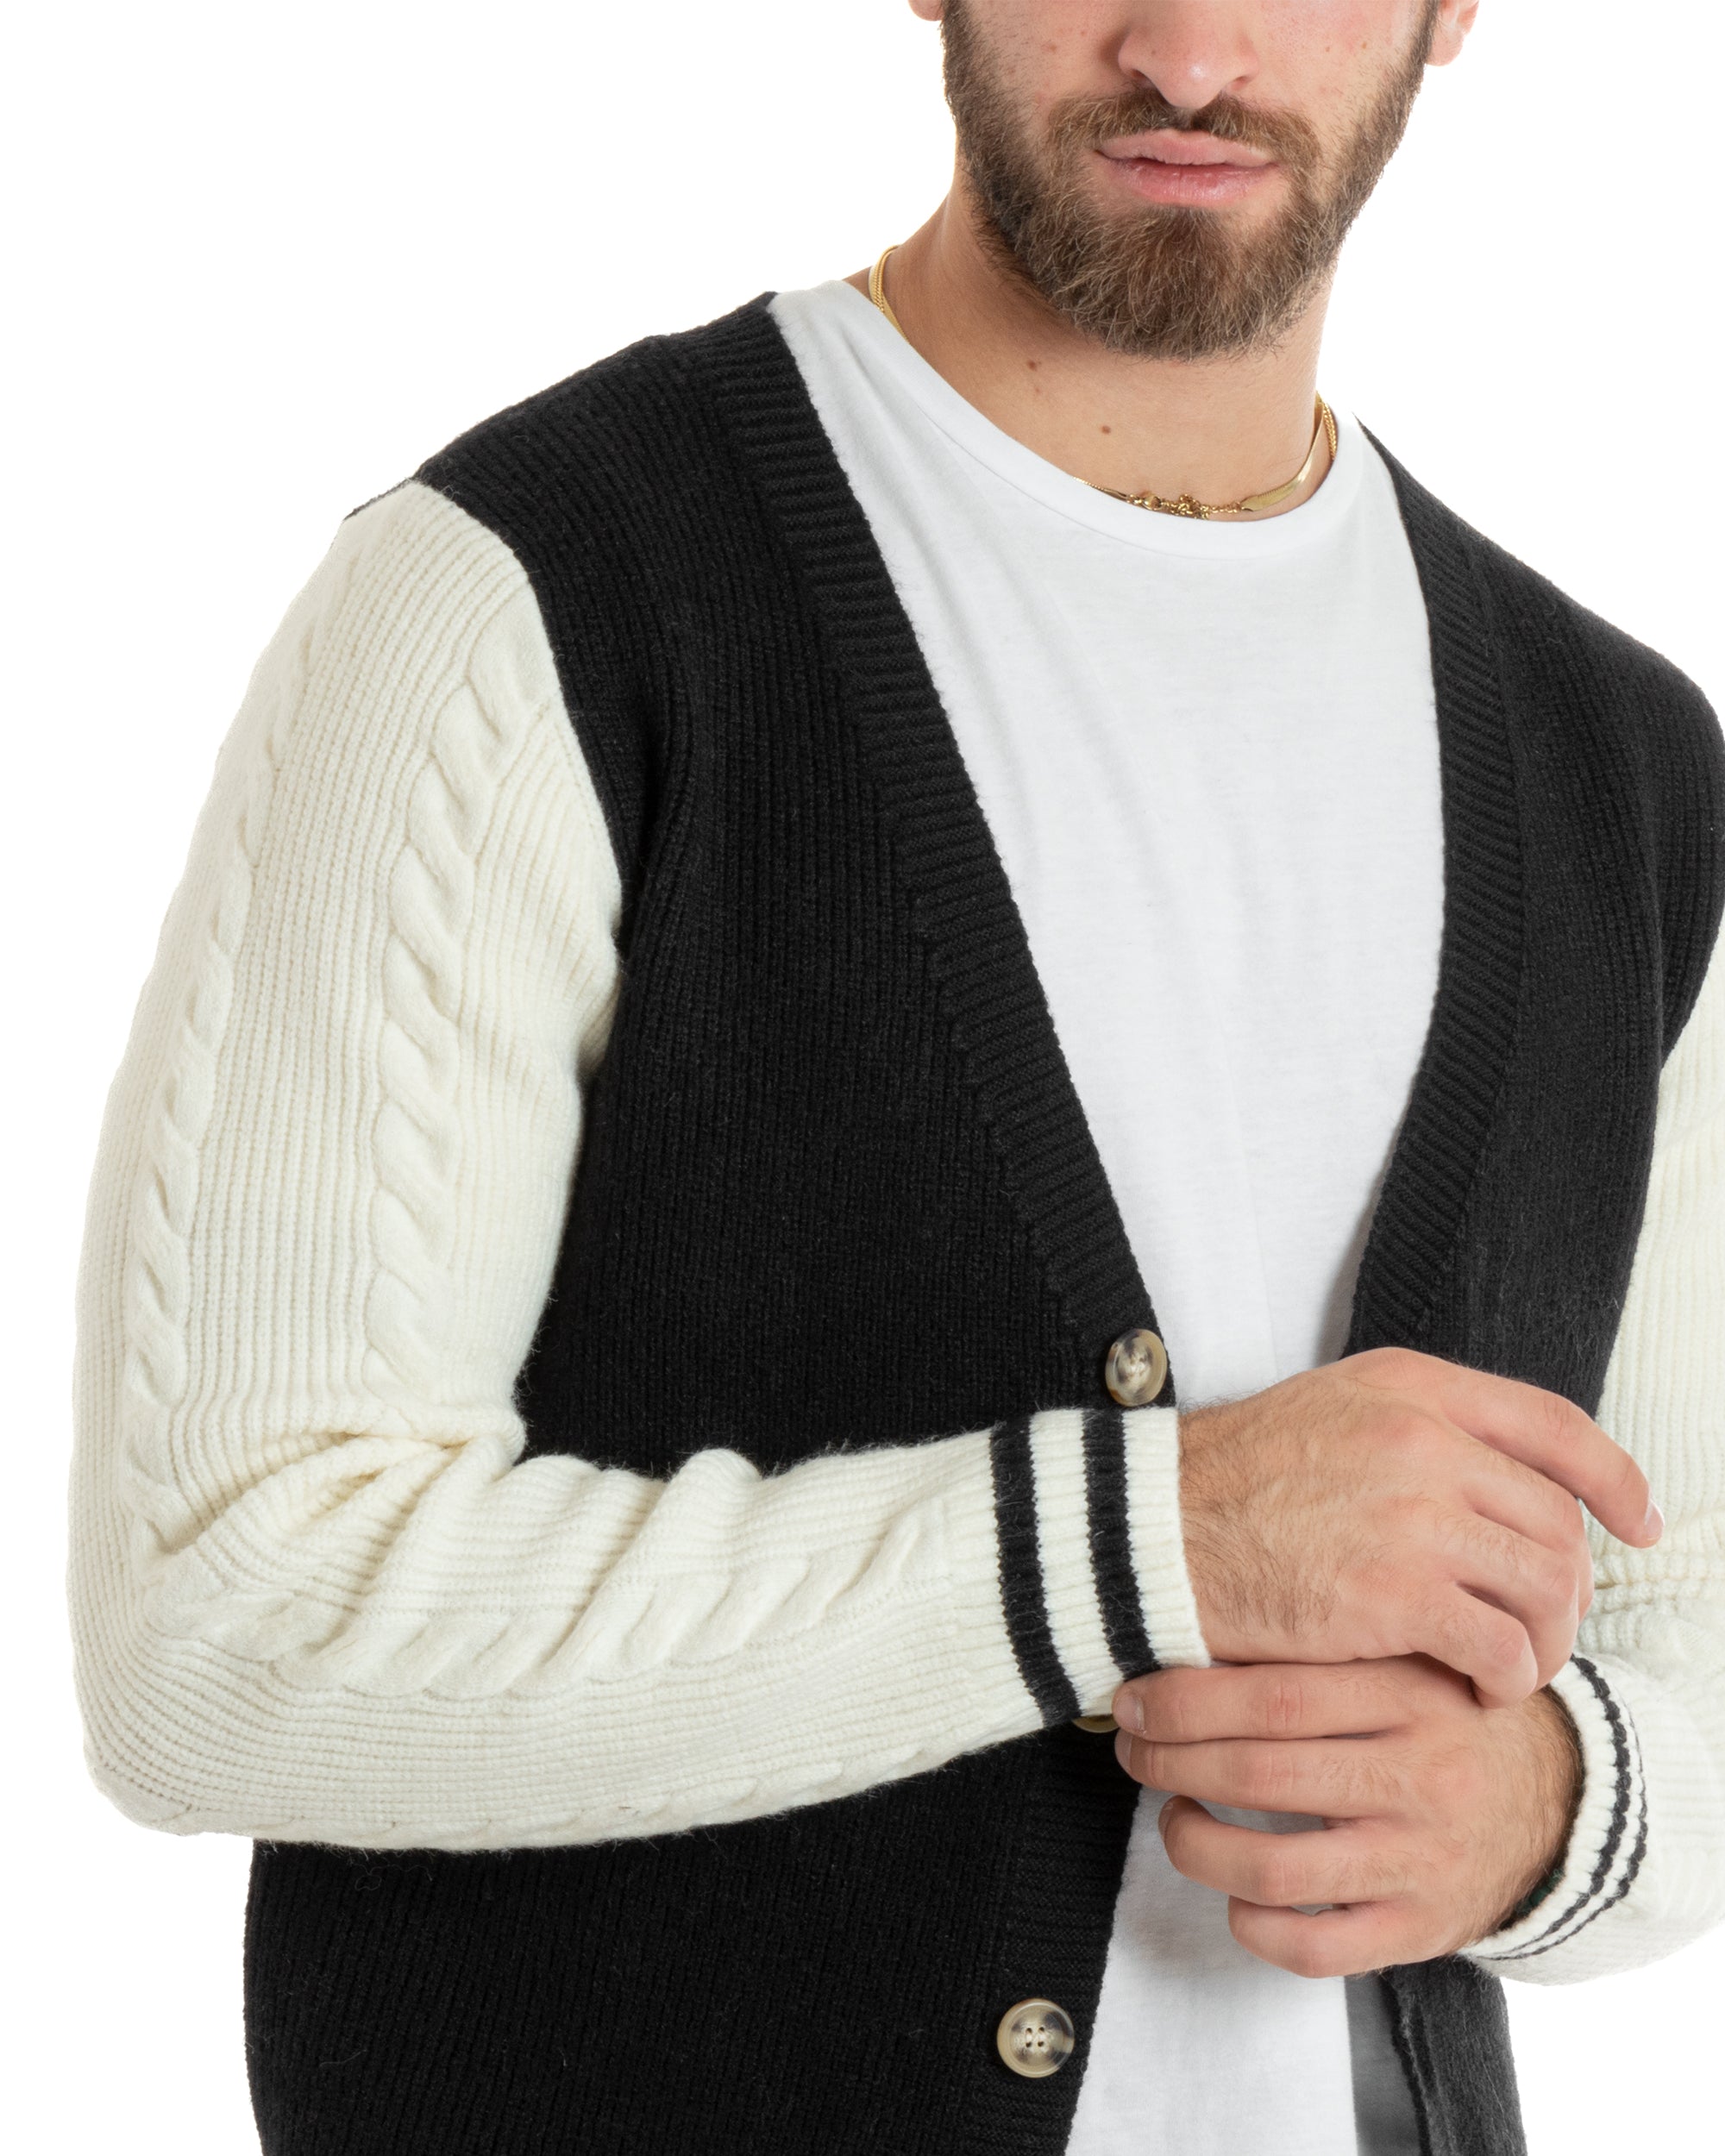 Men's Cardigan Jacket With Buttons Knit Sweater Solid Color Casual Gray GIOSAL-M2662A